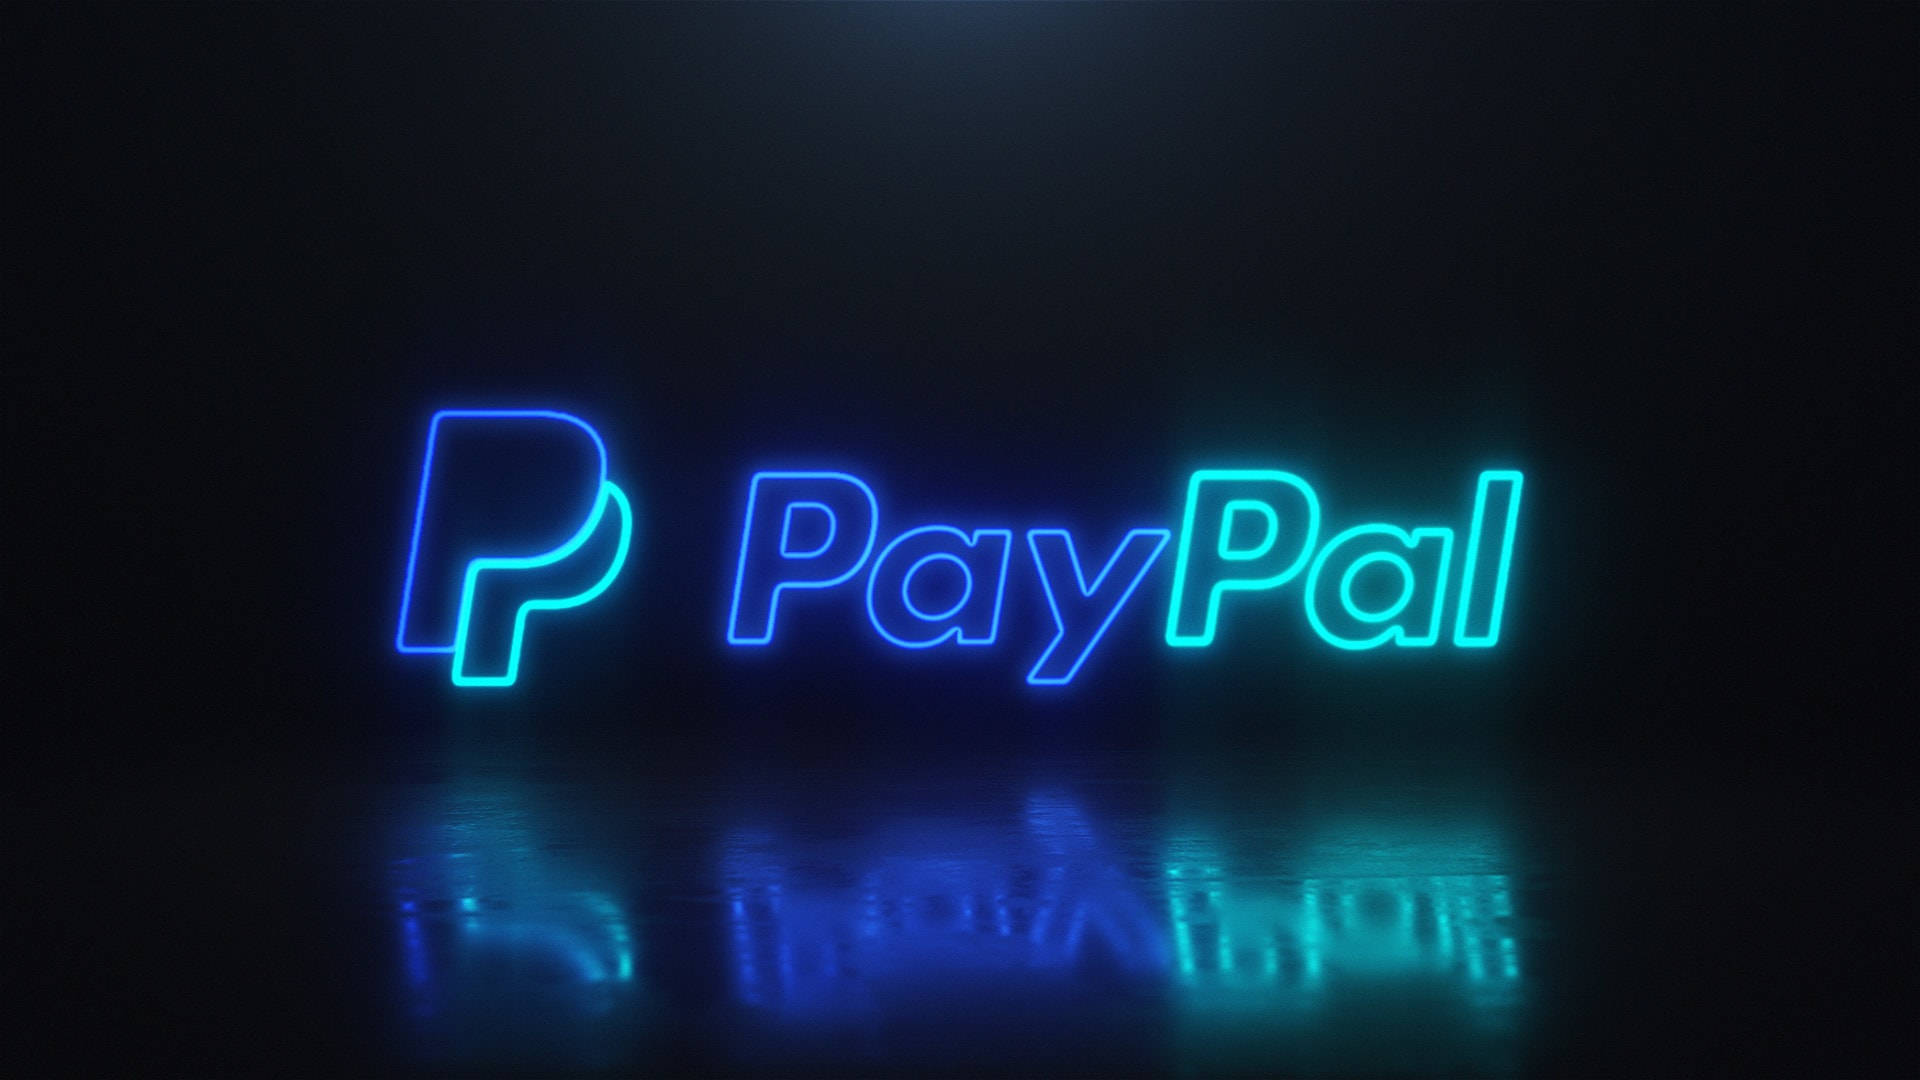 Paypal Neon Light Sign Background